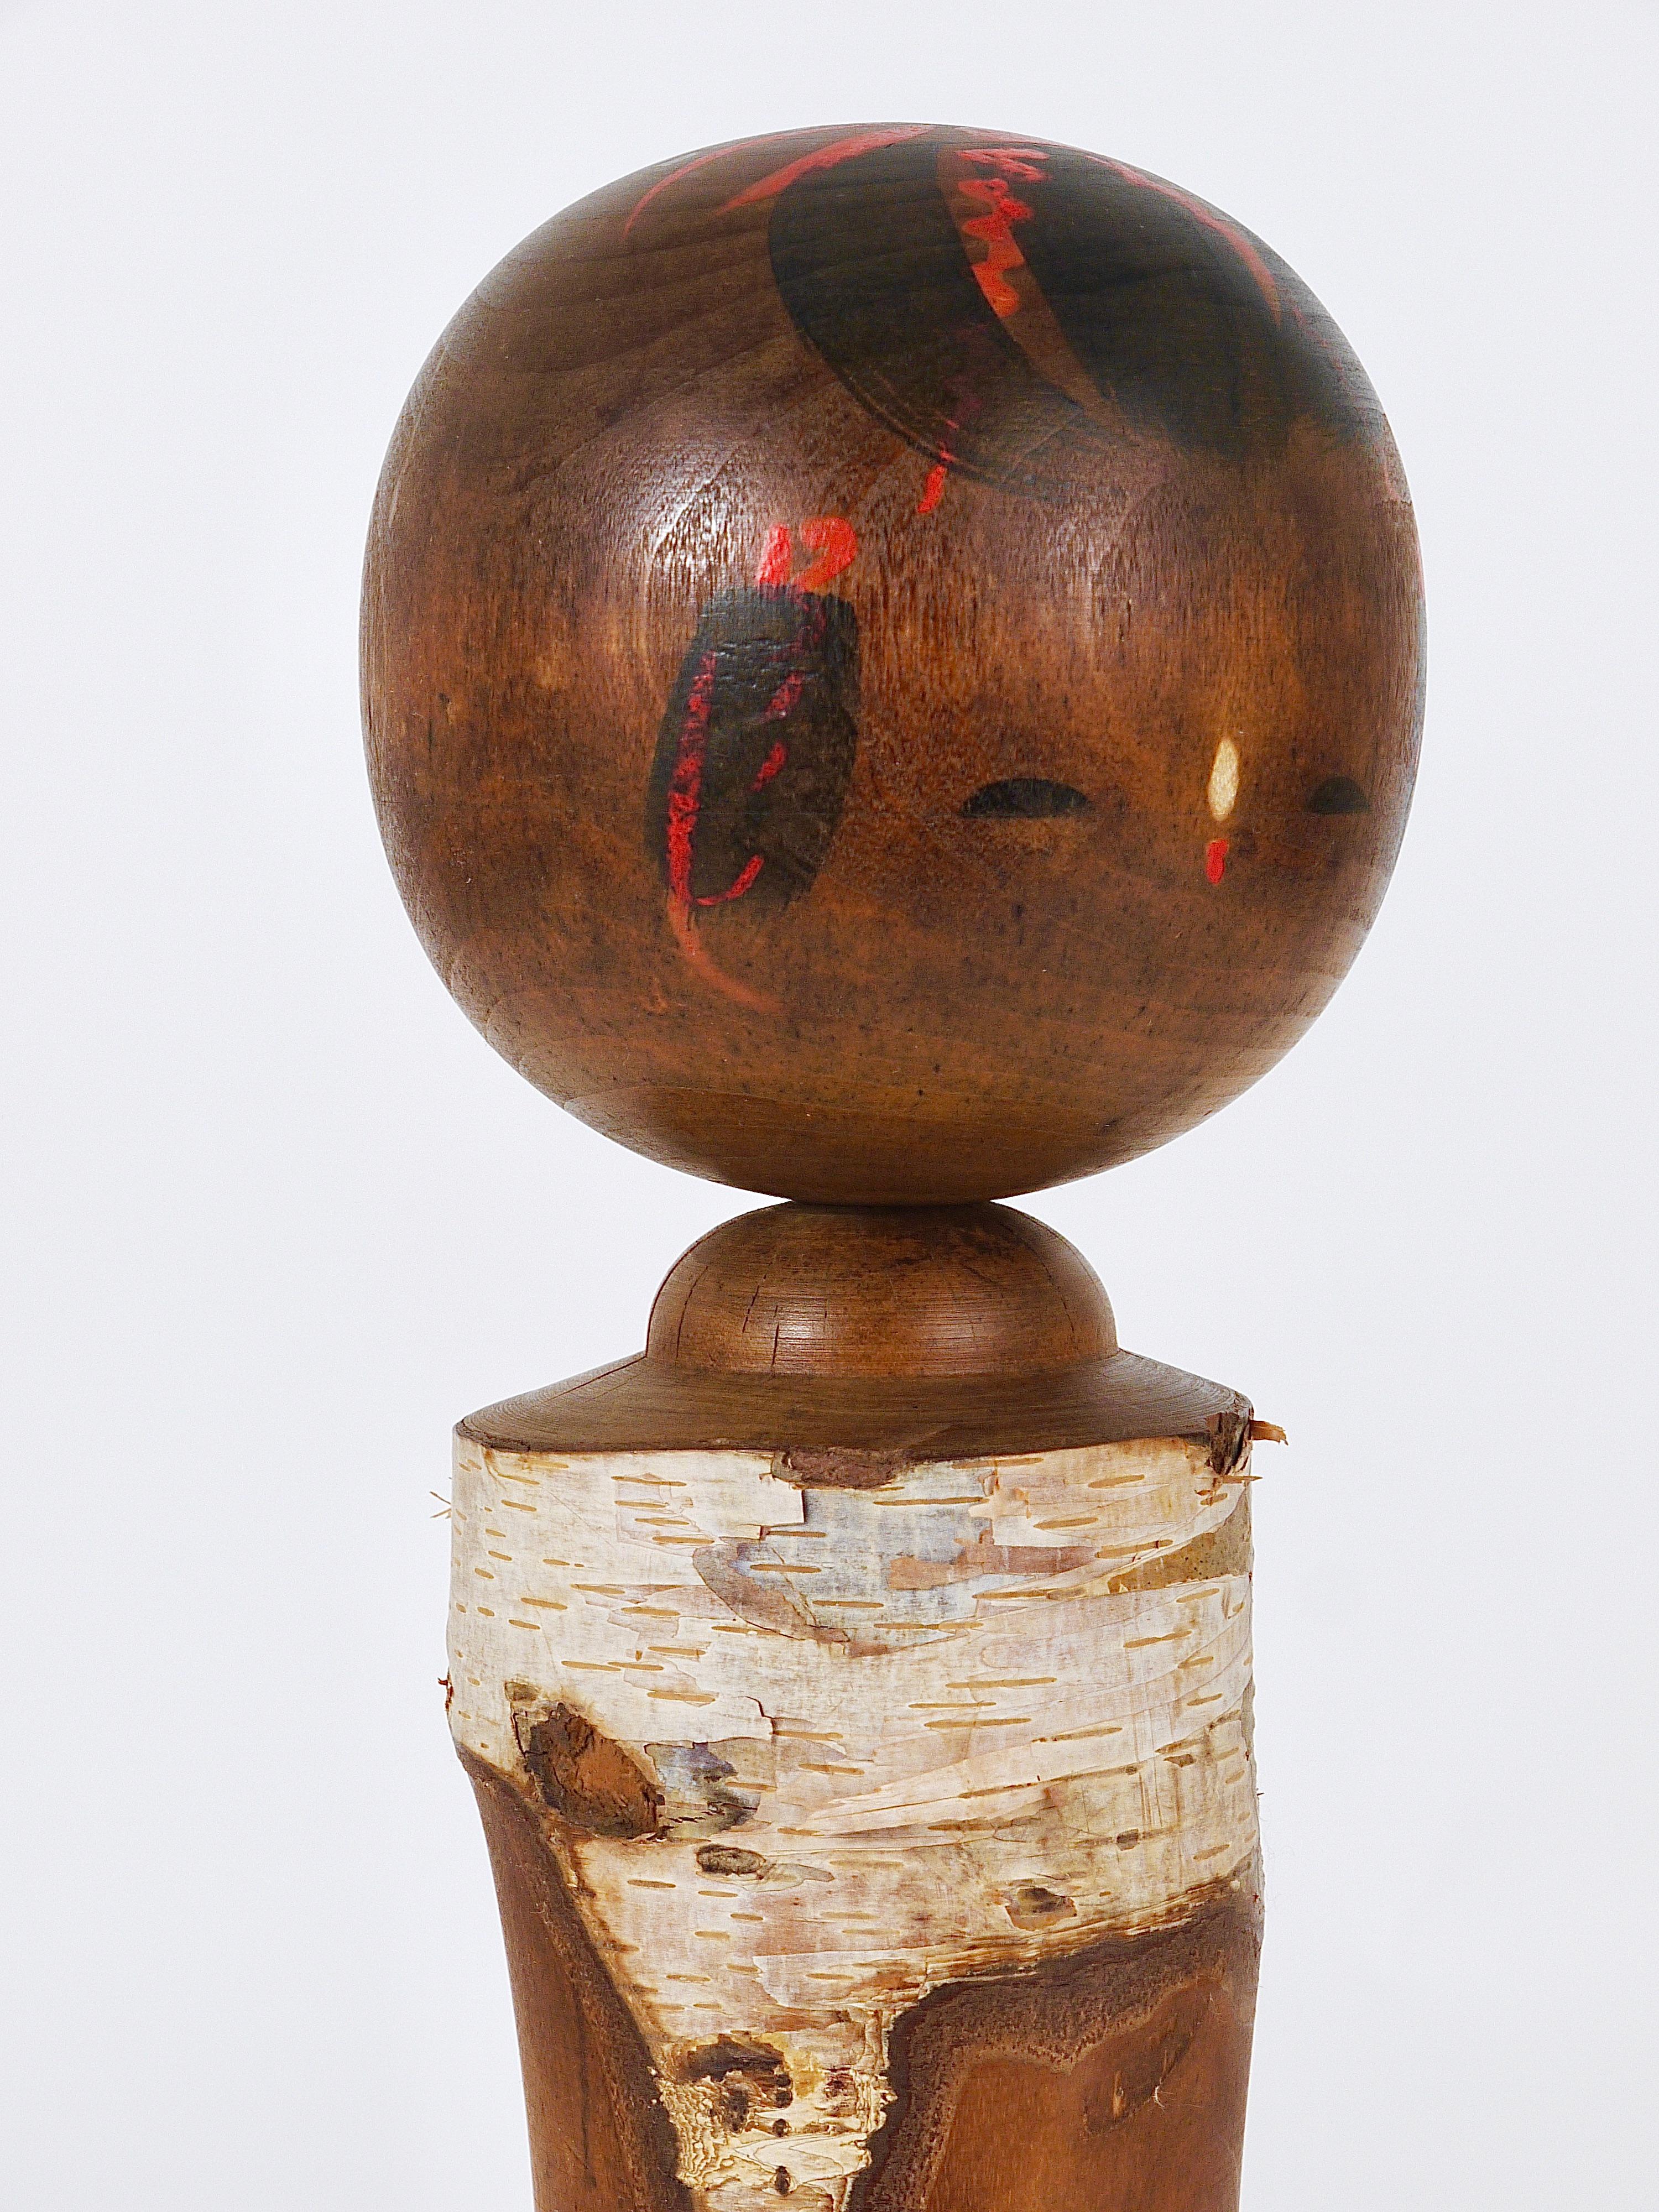 Wood Decorative Kokeshi Doll Sculpture from Northern Japan, Hand-Painted For Sale